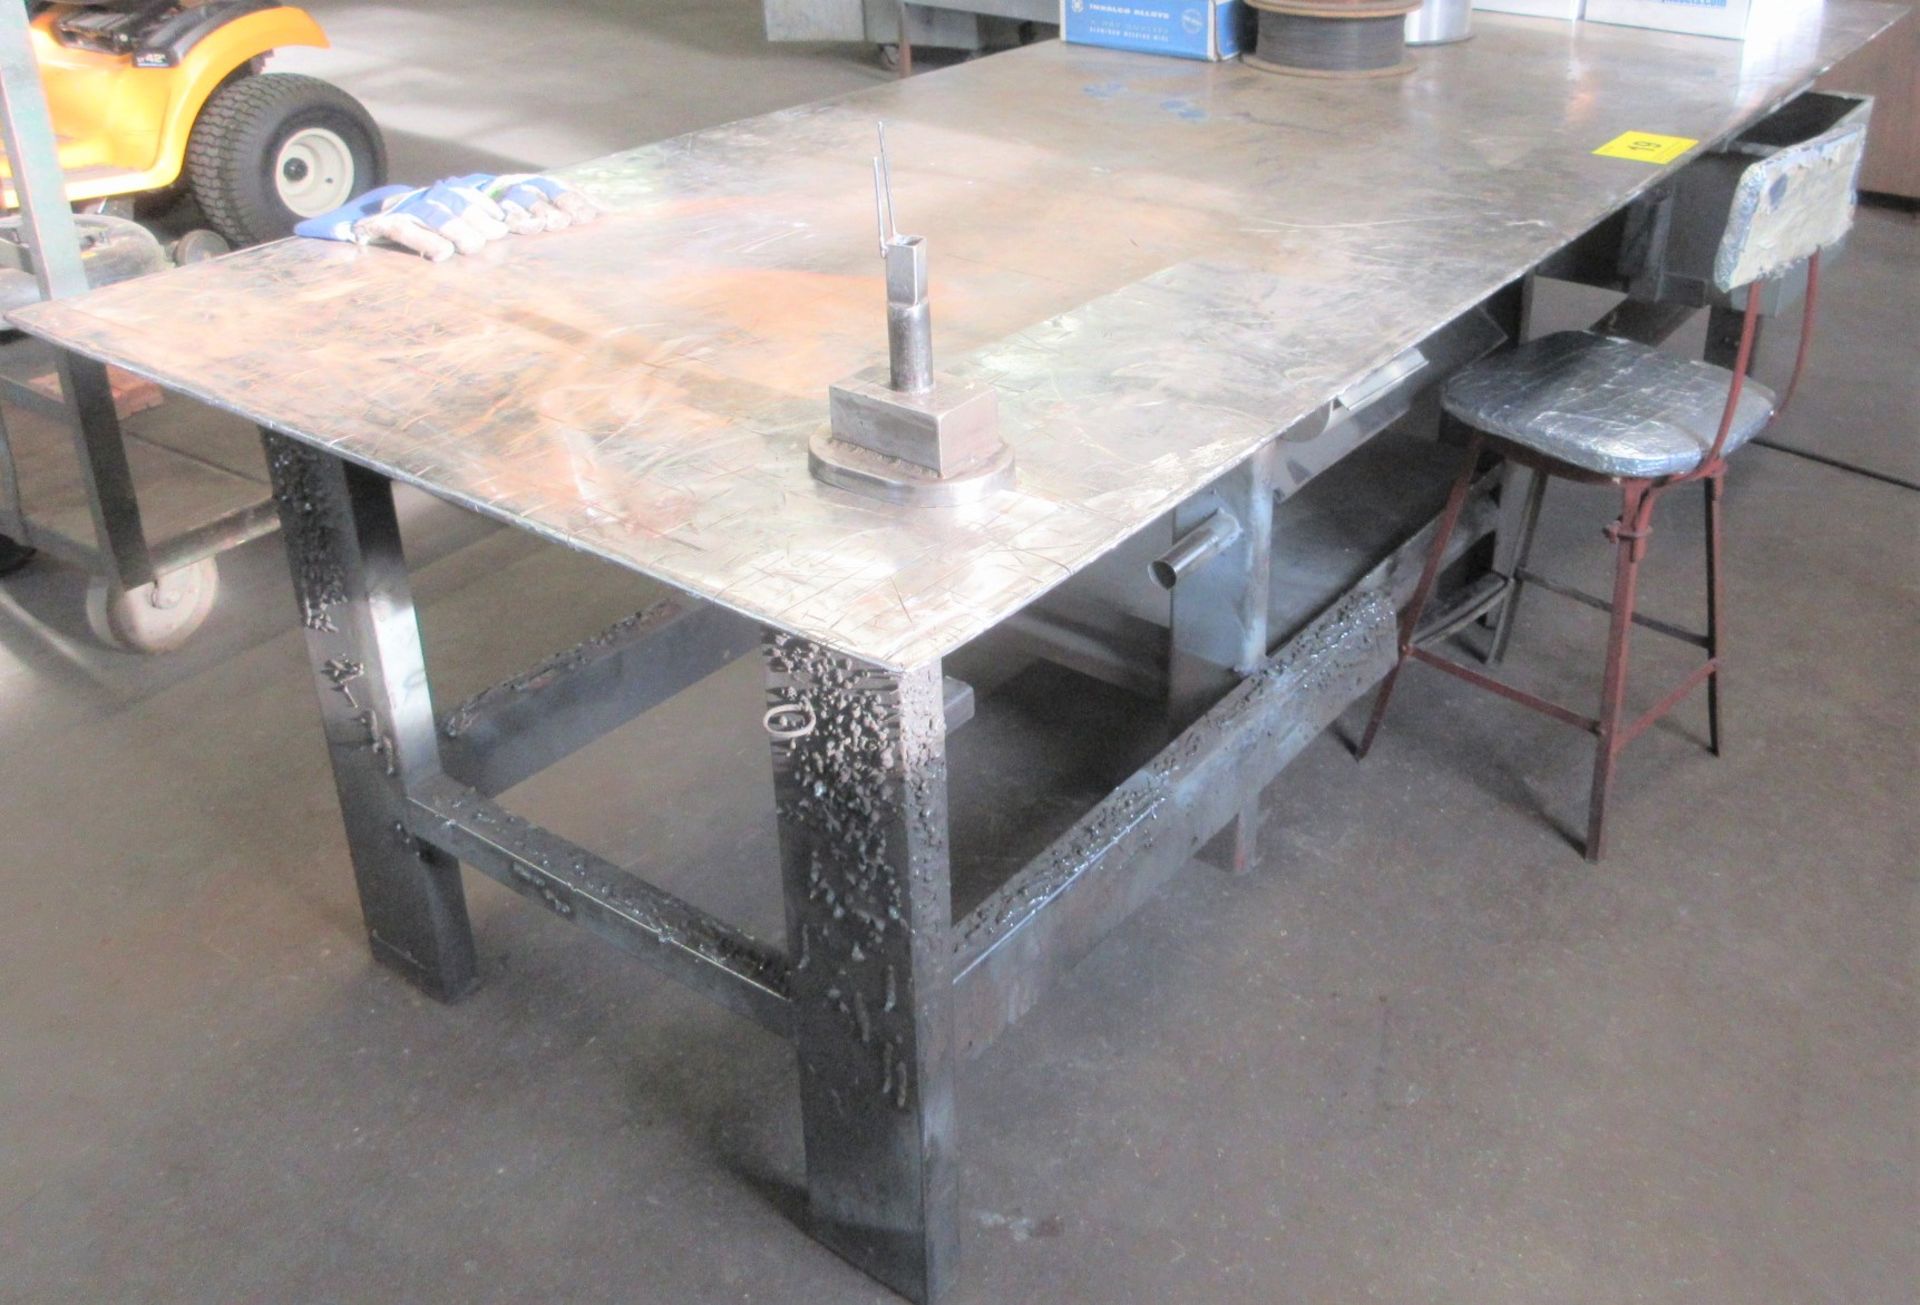 APPROX. 10'L X 4'W X 3/8" THICK TOP WELDING TABLE (NO CONTENTS)